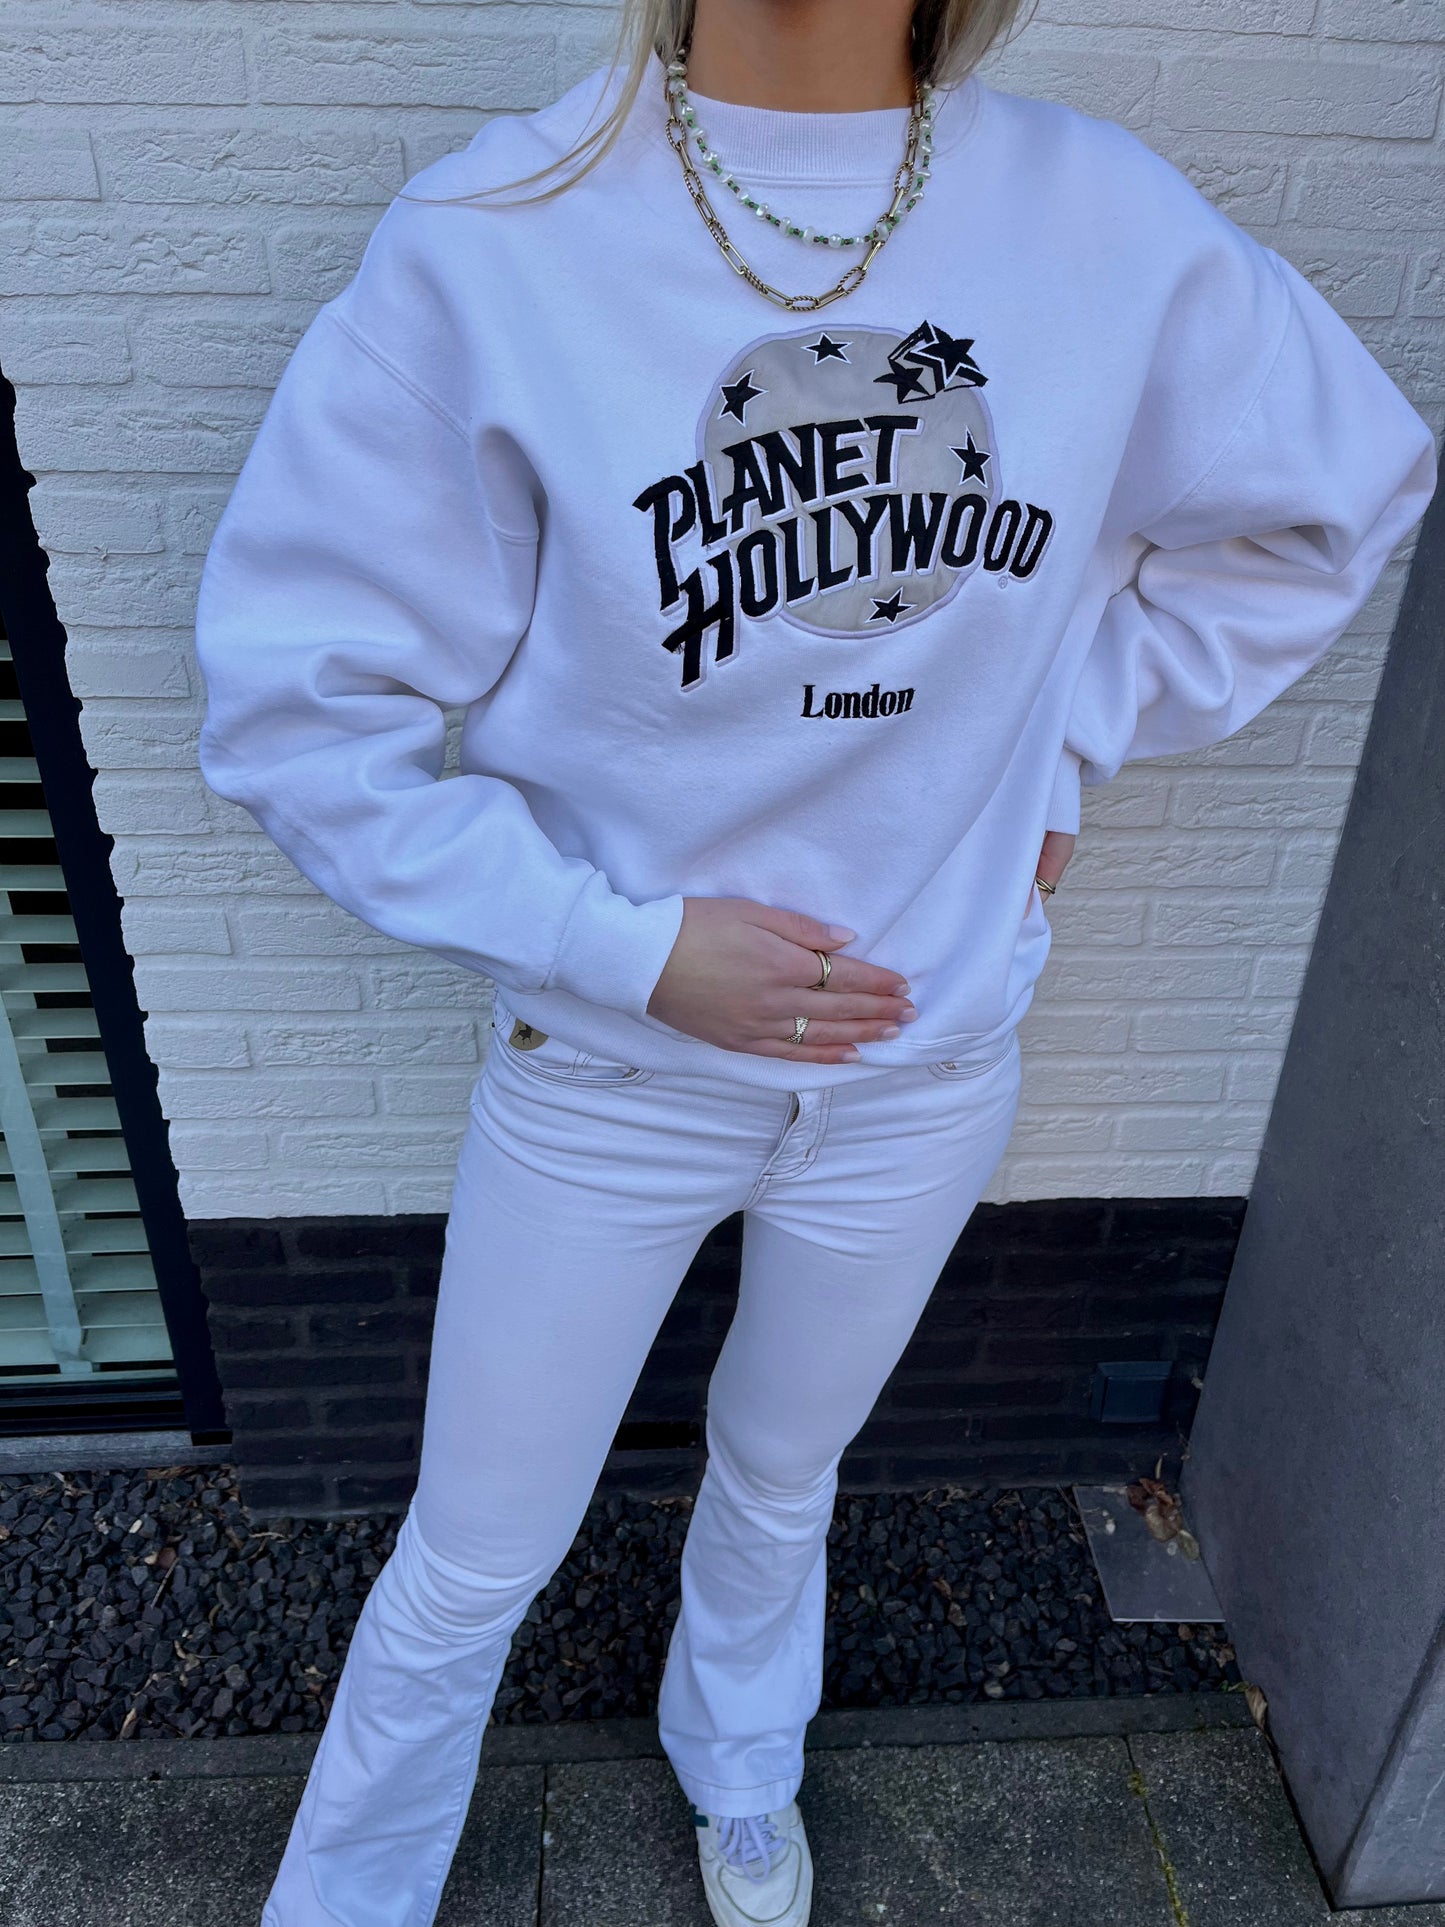 Vintage Planet Hollywood London sweater | Laura Stappers Vintage